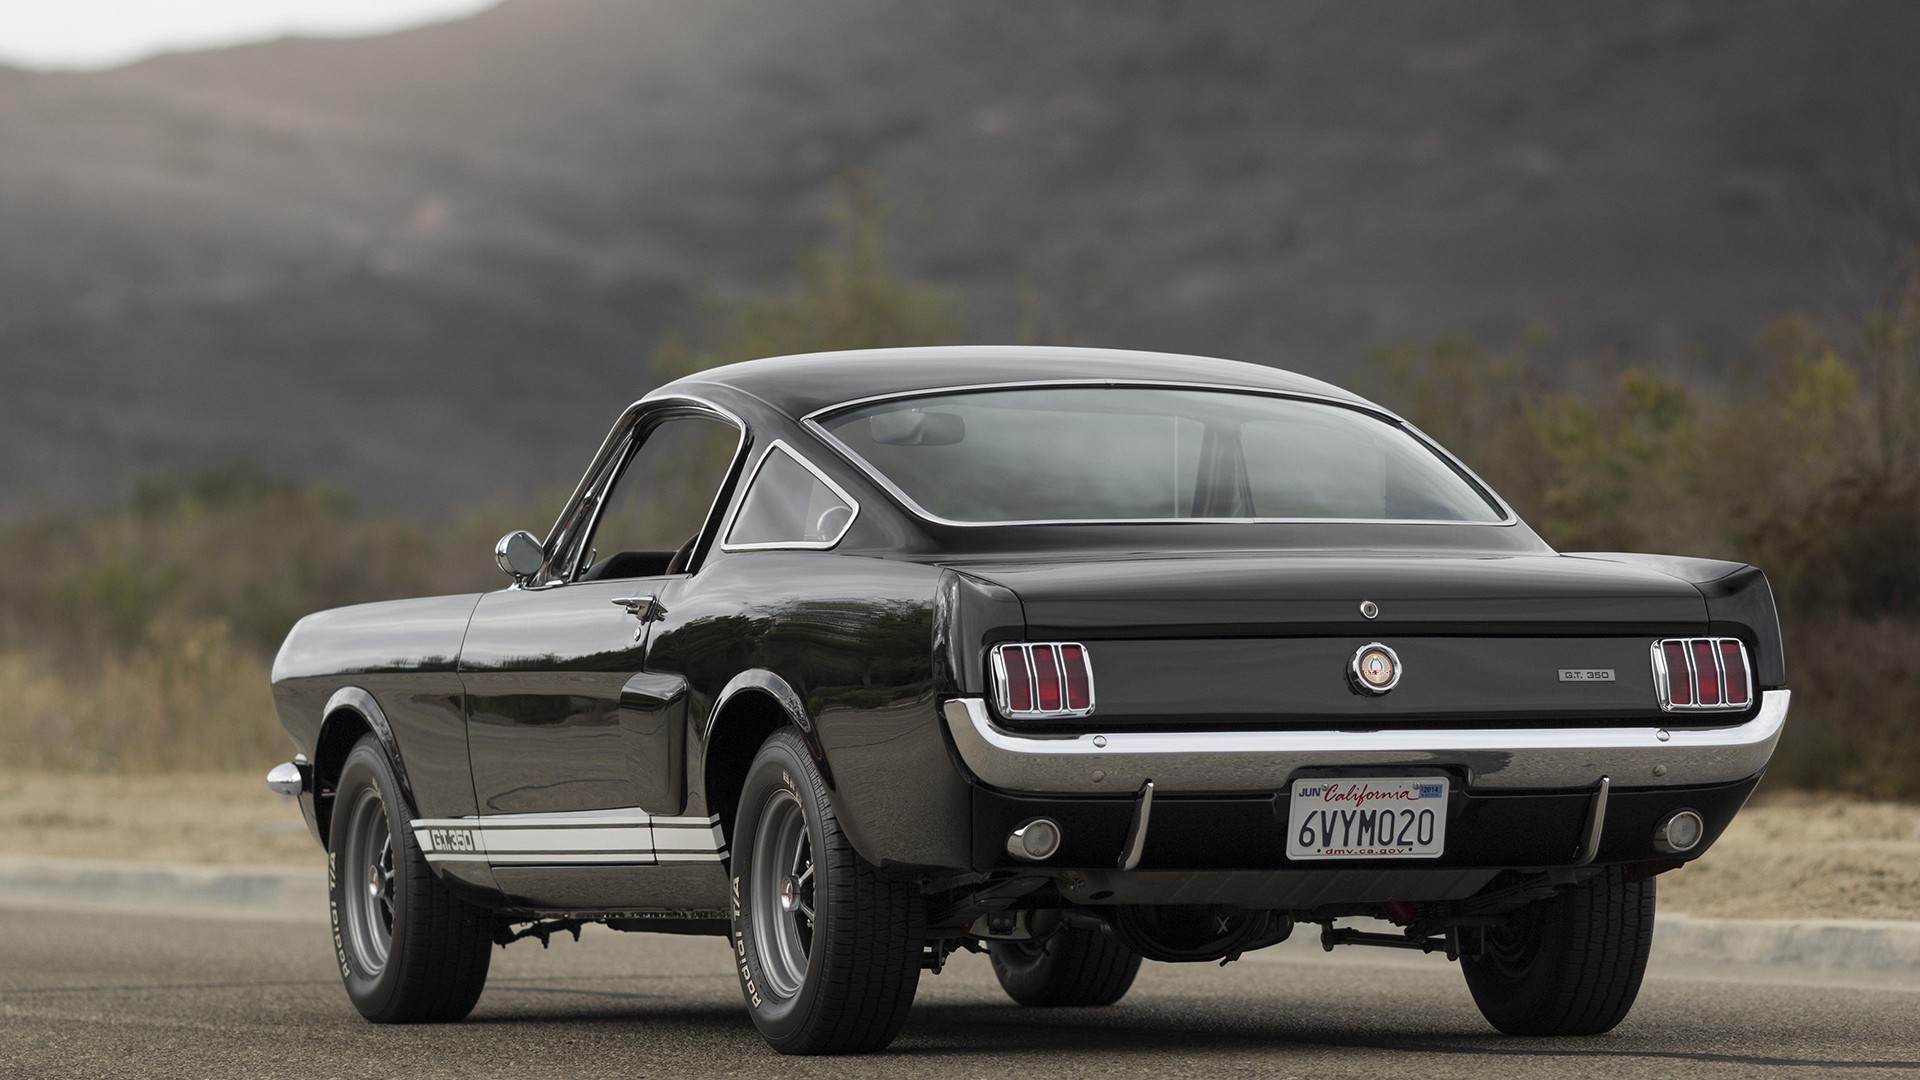 General 1920x1080 car Ford Mustang Shelby Ford Ford Mustang American cars muscle cars